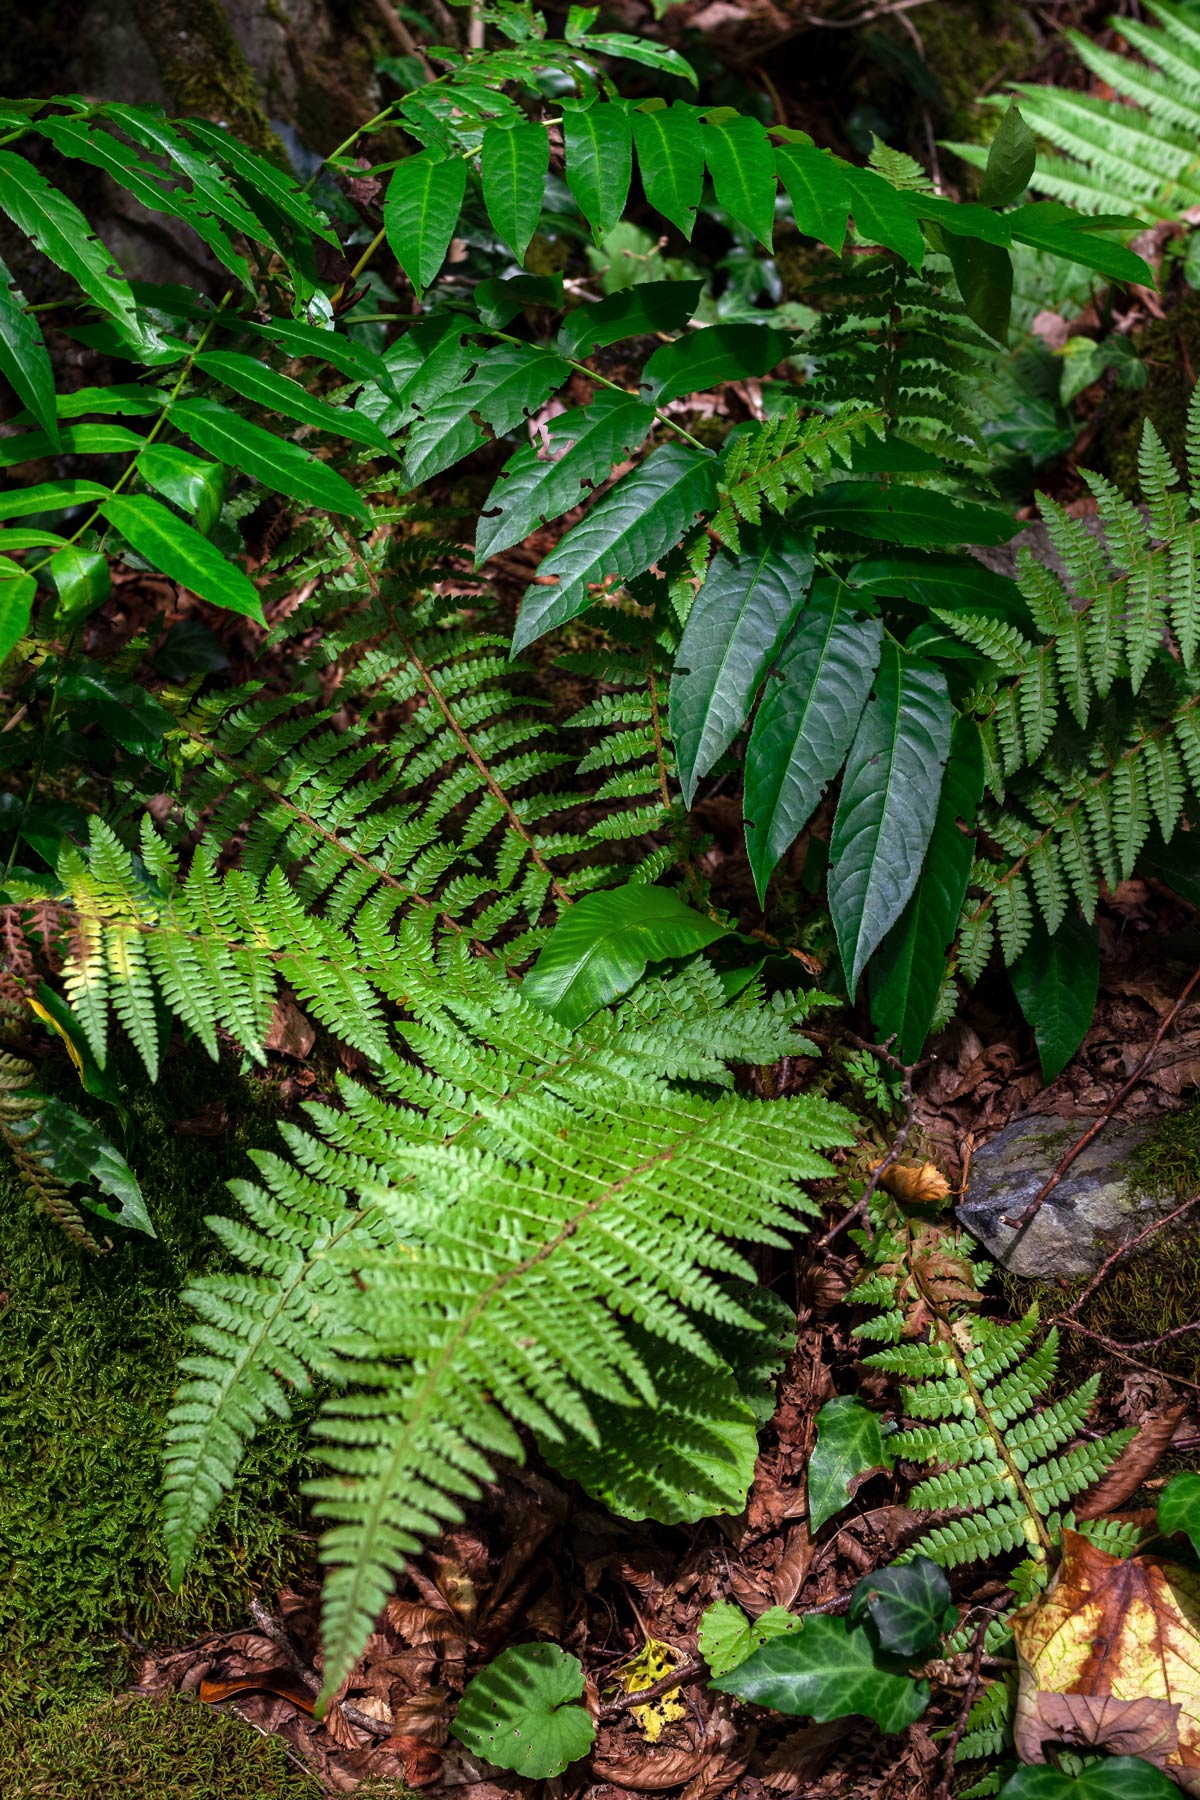 Ferns and green leaves in a rainforest.